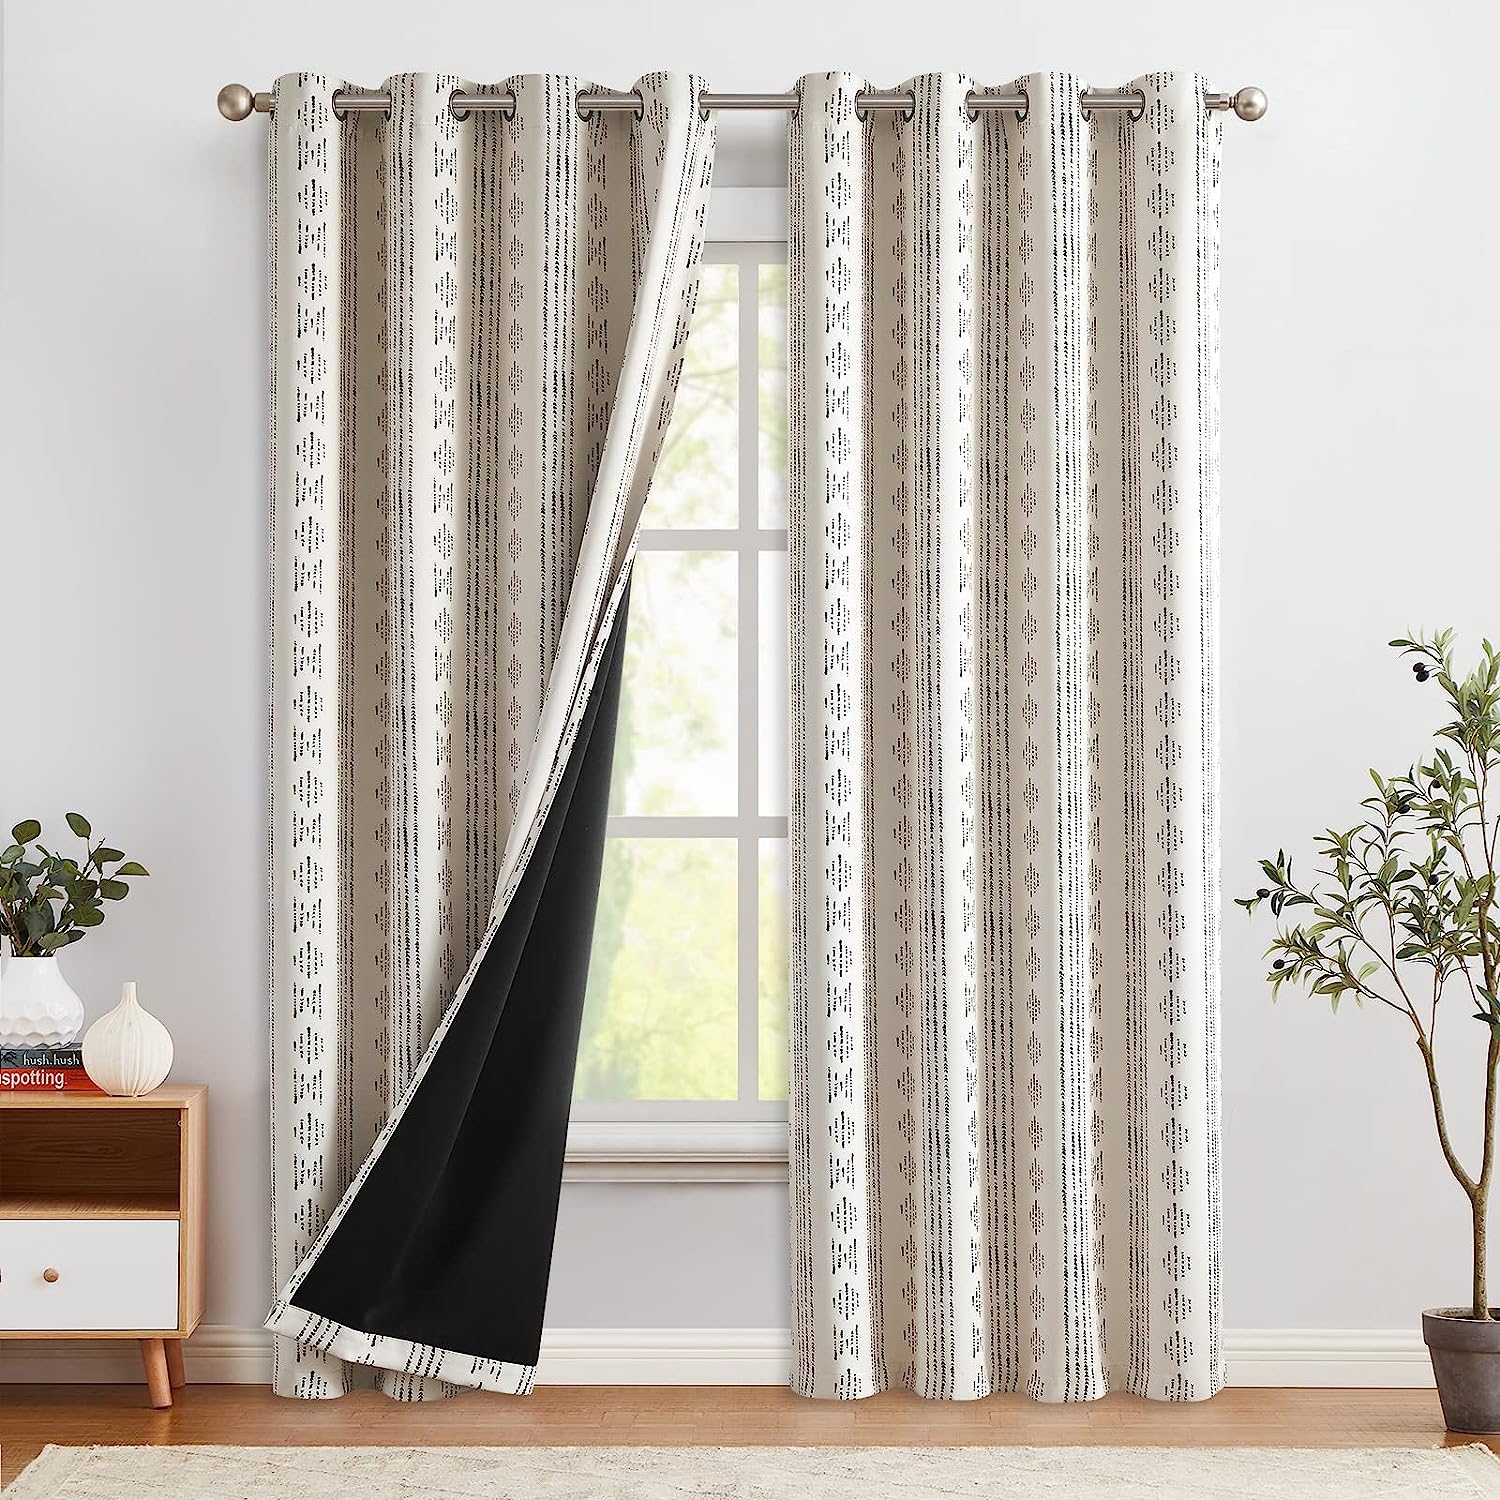 COLLACT 100% Blackout Boho Curtains for Bedroom 96 [...]